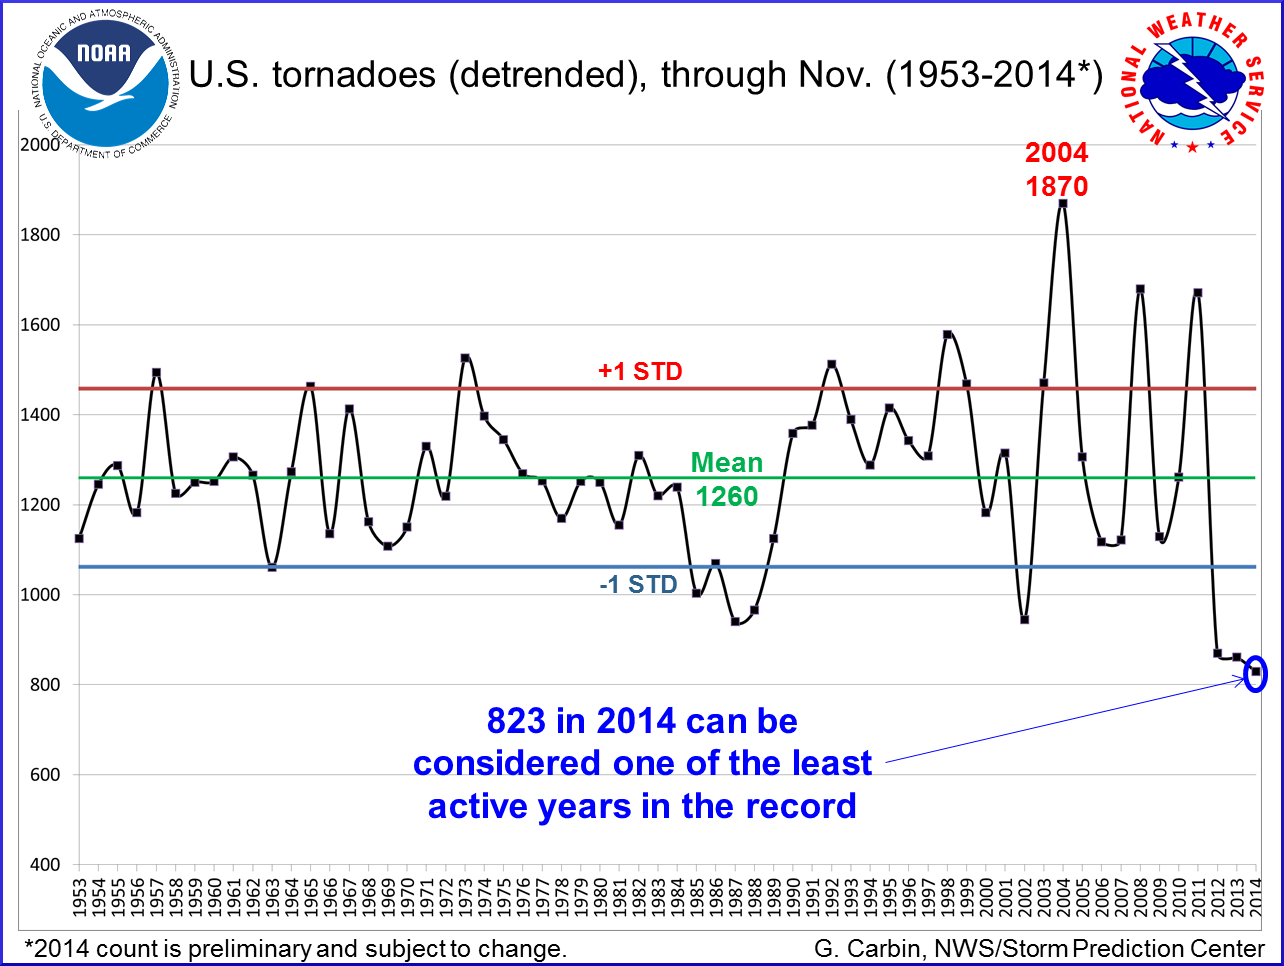 U.S. tornadoes (detrended), through November 1953 to 2014